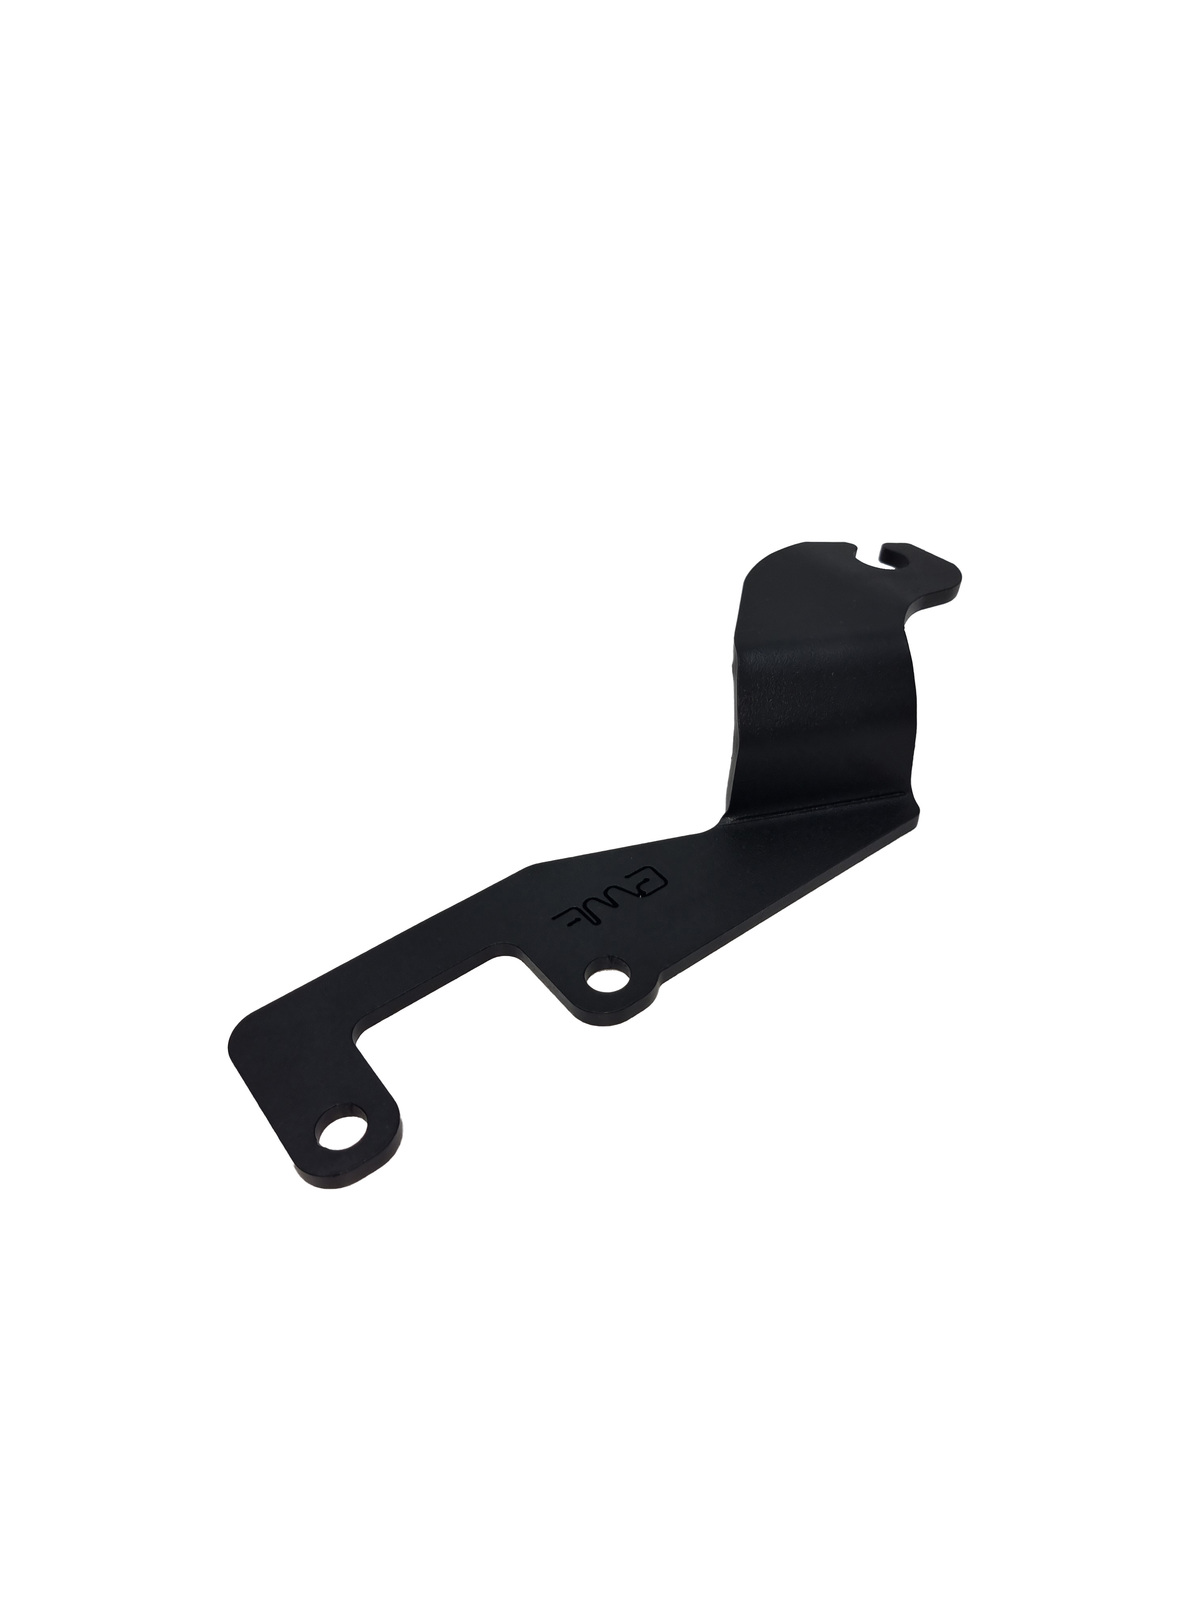 GMF 4X4 UHF ANTENNA BONNET BRACKET (DRIVER SIDE) TO SUIT NISSAN NP300 (2015-ON)